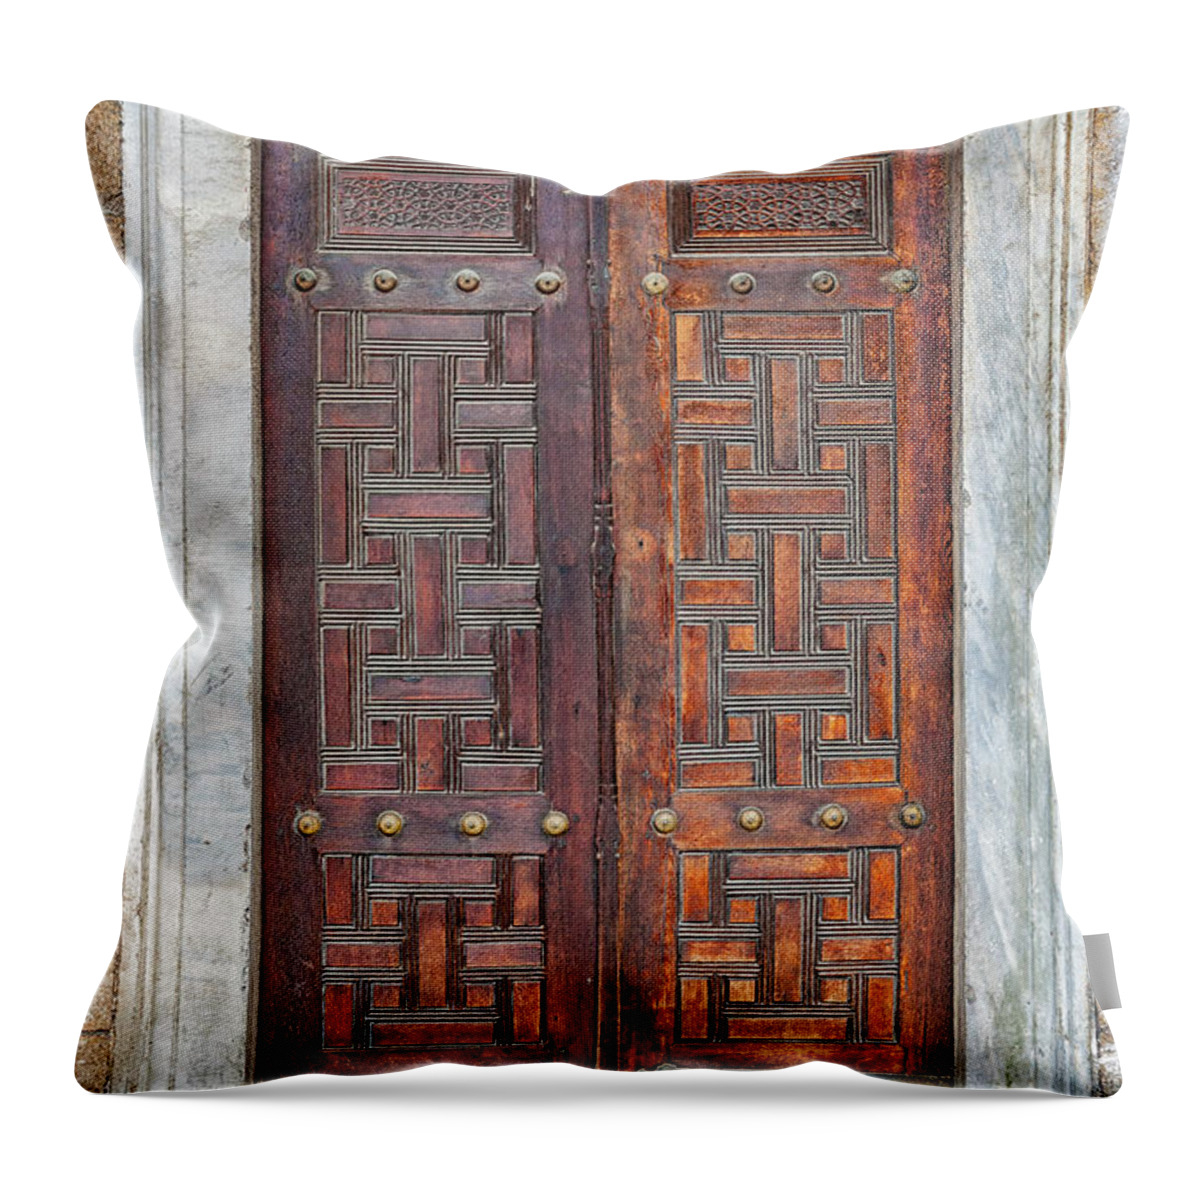 Istanbul Throw Pillow featuring the photograph Blue Mosque Door by Antony McAulay